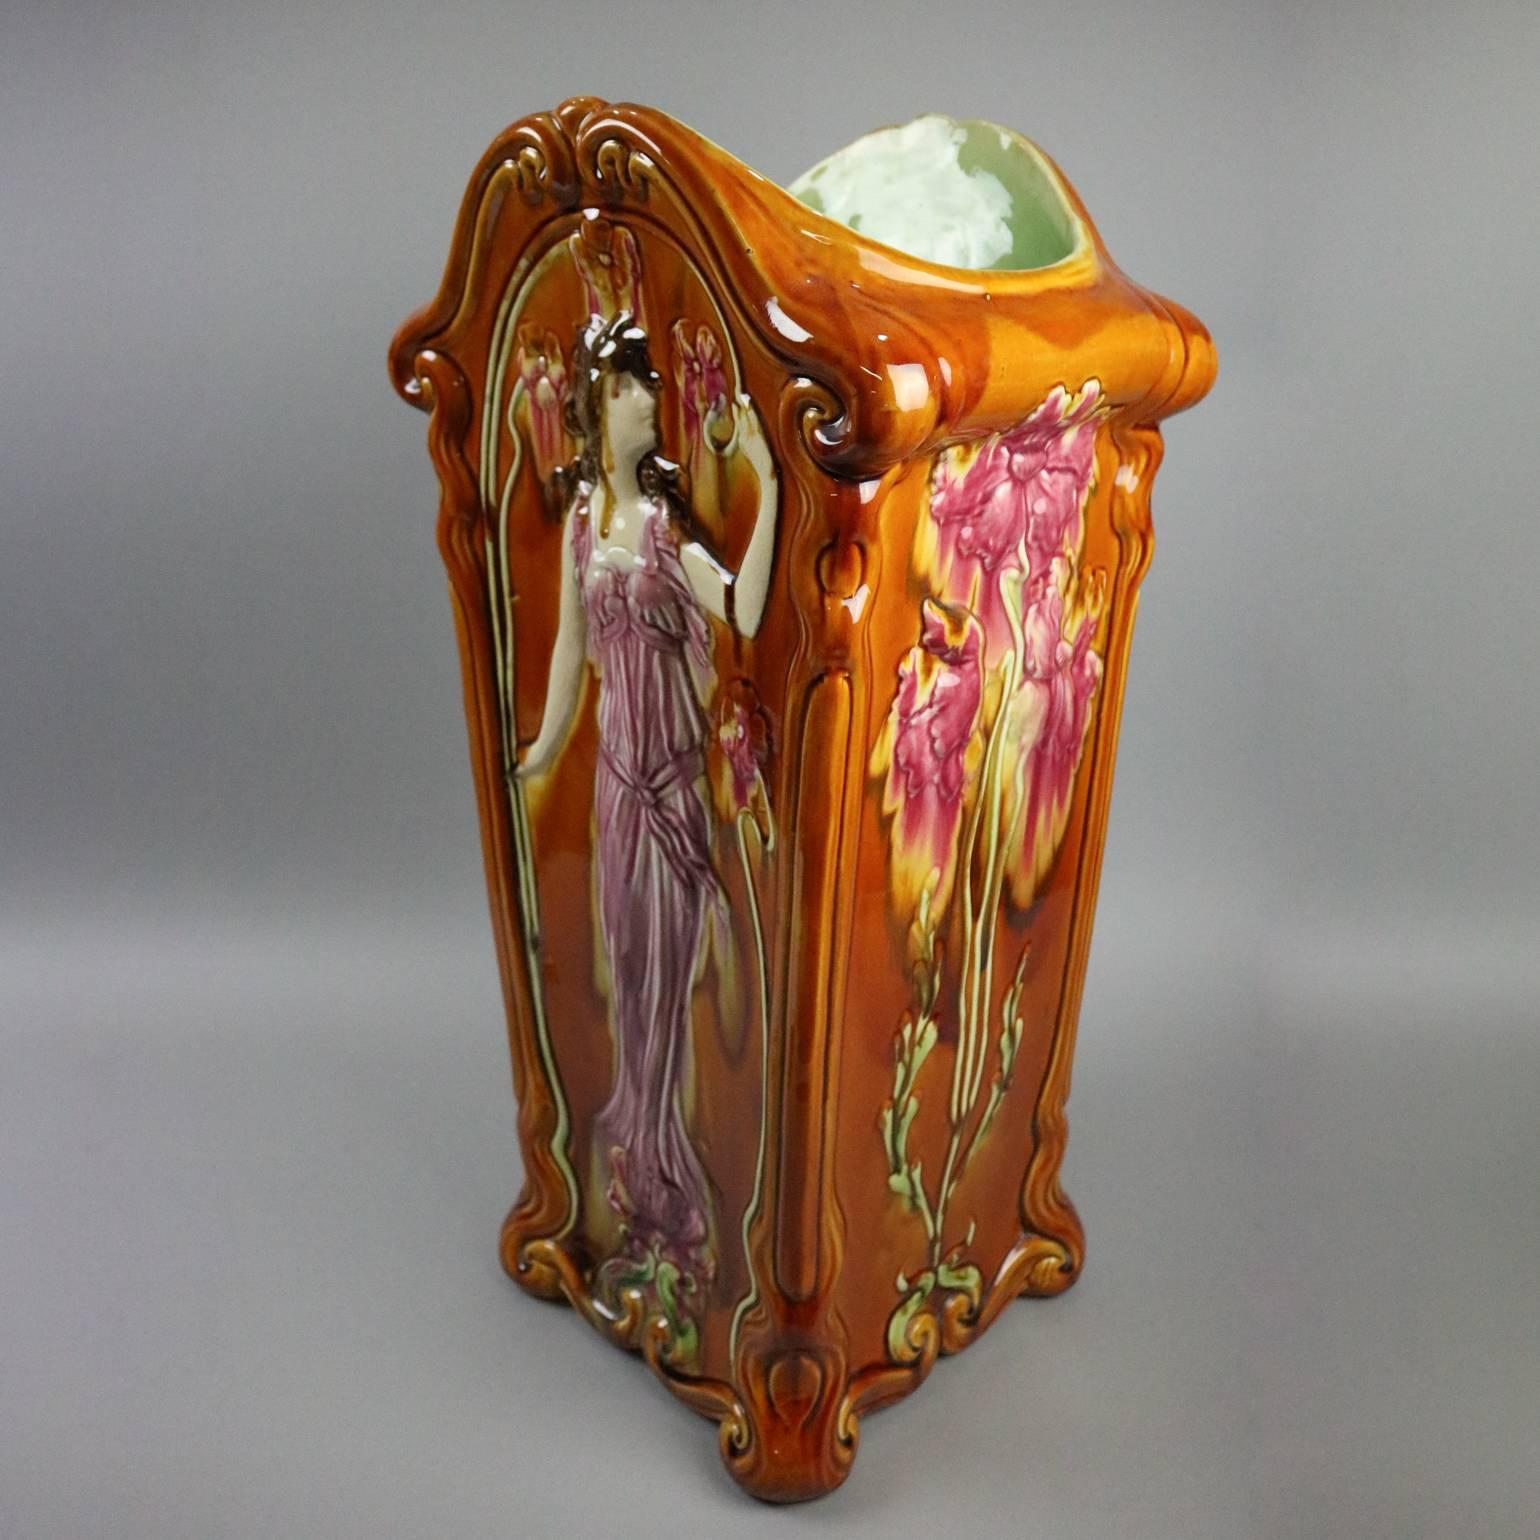 Antique Austrian Art Nouveau Majolica art pottery umbrella stand features full length high relief portrait of woman on front with lilies on each side, floral and foliate decorated, reminiscent of Louis Icart and Erte, circa 1920.

Measures: 26.5